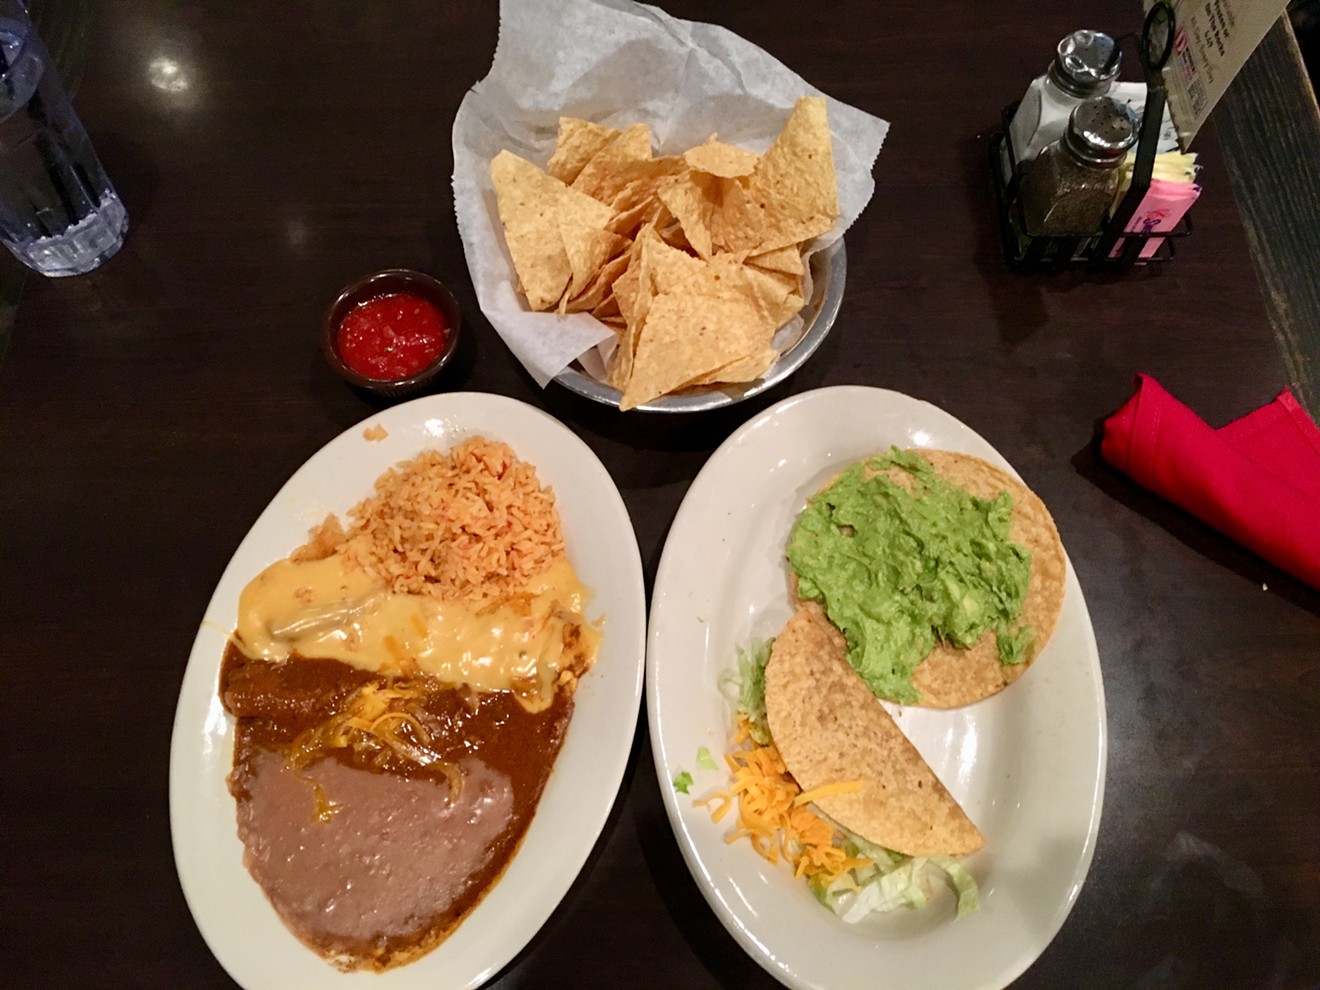 The Taxco plate, with two enchiladas (one coated in queso and the other in El Fenix's chile con carne), a beef picadillo taco and a guacamole tostada for $12.49.